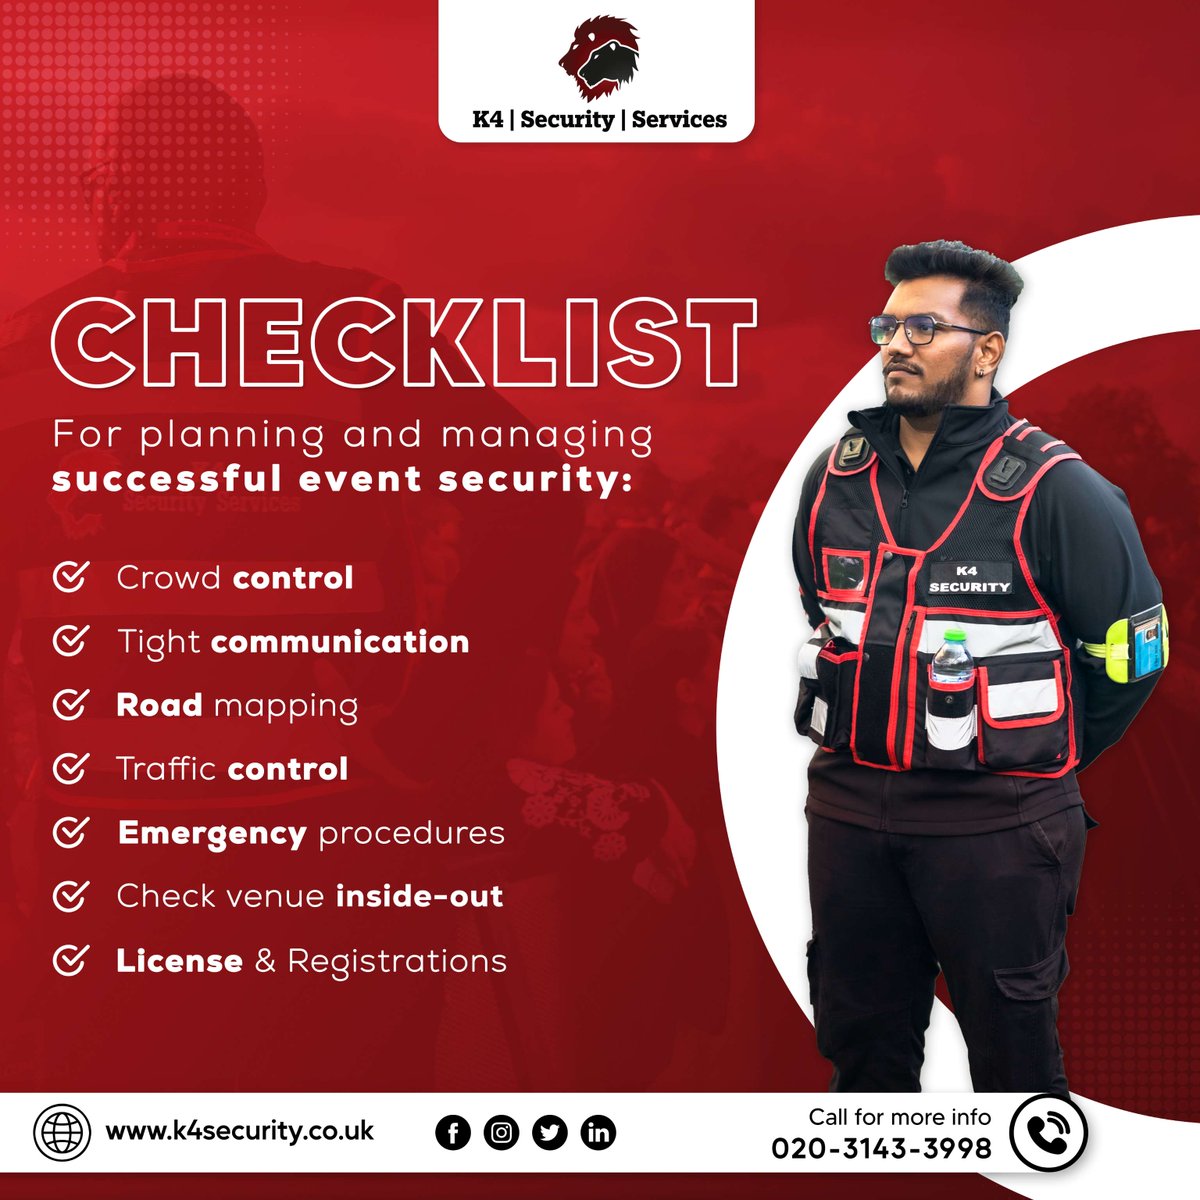 Trust K4 to safeguard your success!'

When the beat drops, but security never does. Unleash the party, not the panic. K4 secures every note, every move, every memory!!

#K4Security #K4Secure #EmergencyPlans #TrustUs #HappyNewYear #Secure2024 #EventChecklist